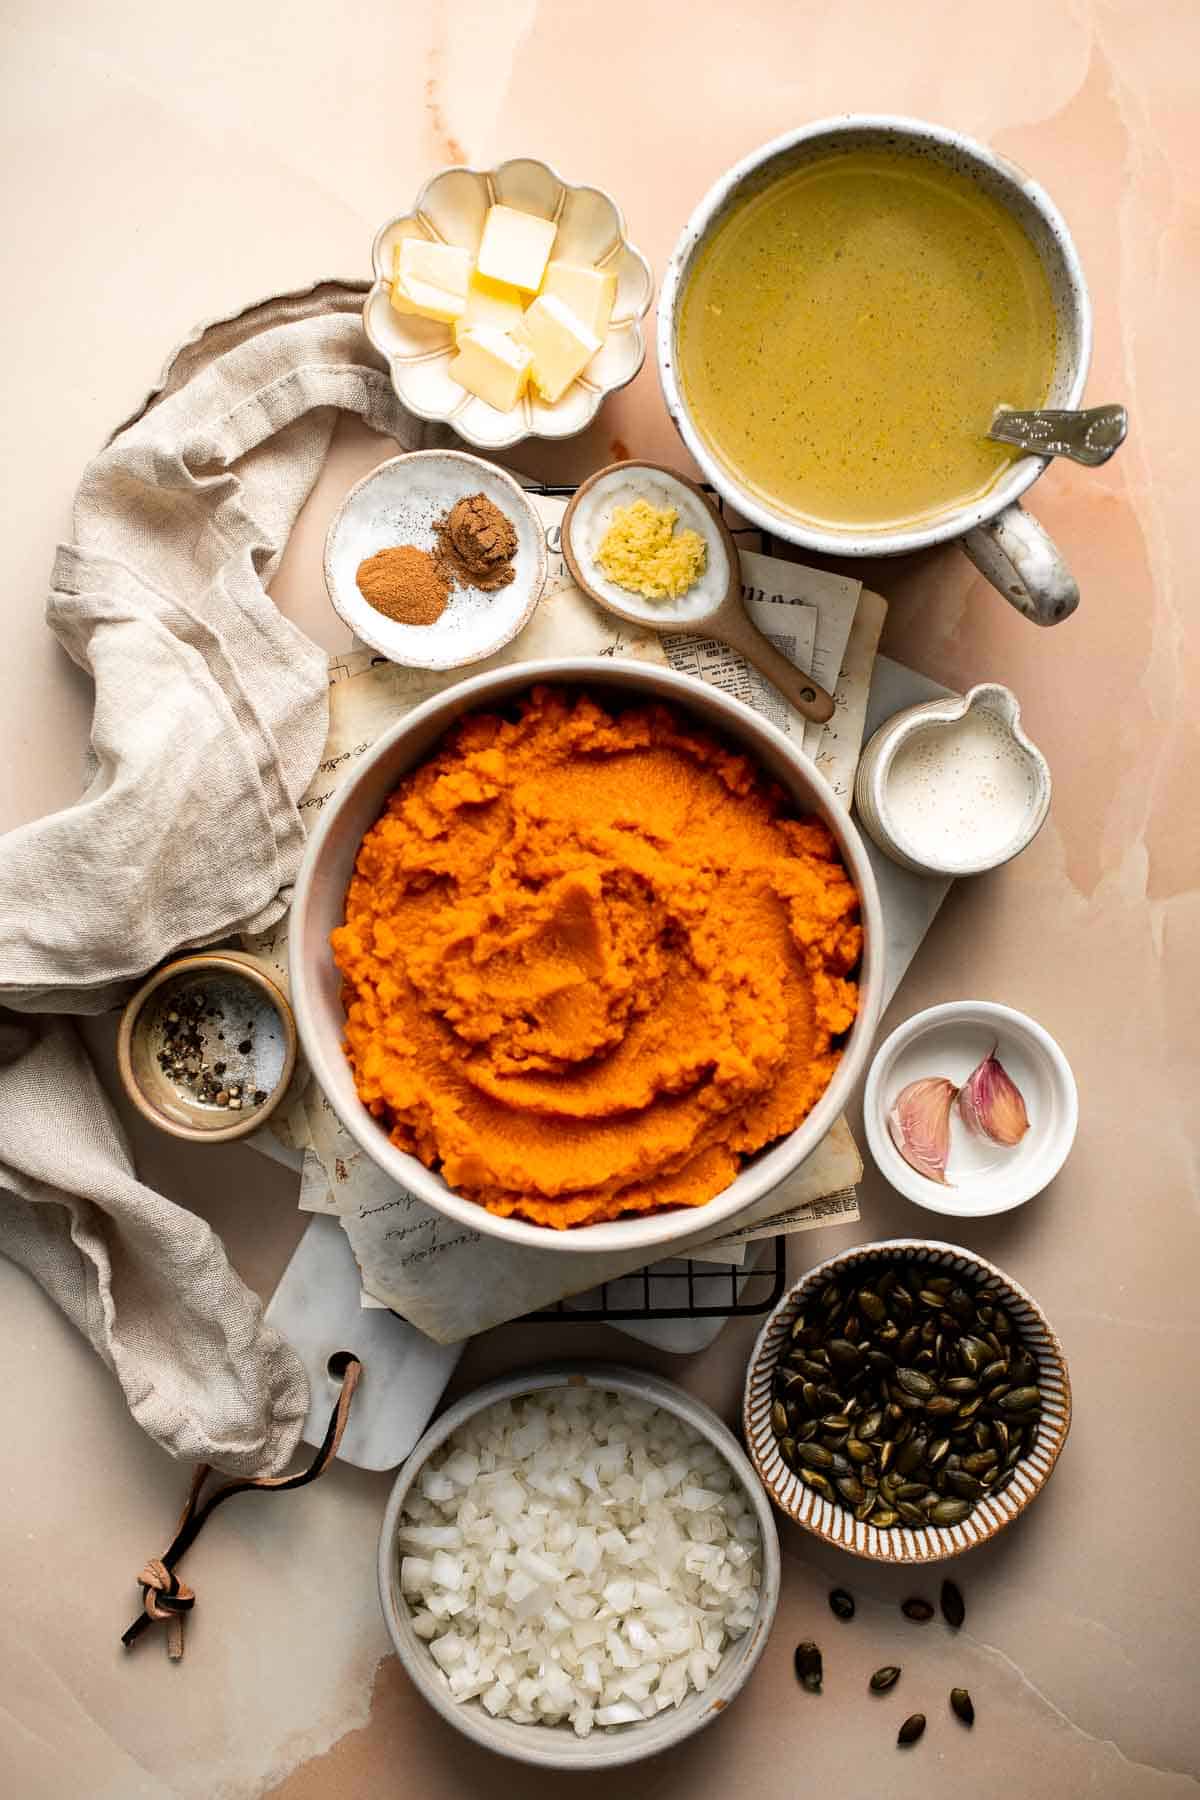 This Pumpkin Soup is perfectly smooth and creamy with aromatic vegetables and warm spices. Make it this fall from start to finish in about 30 minutes! | aheadofthyme.com